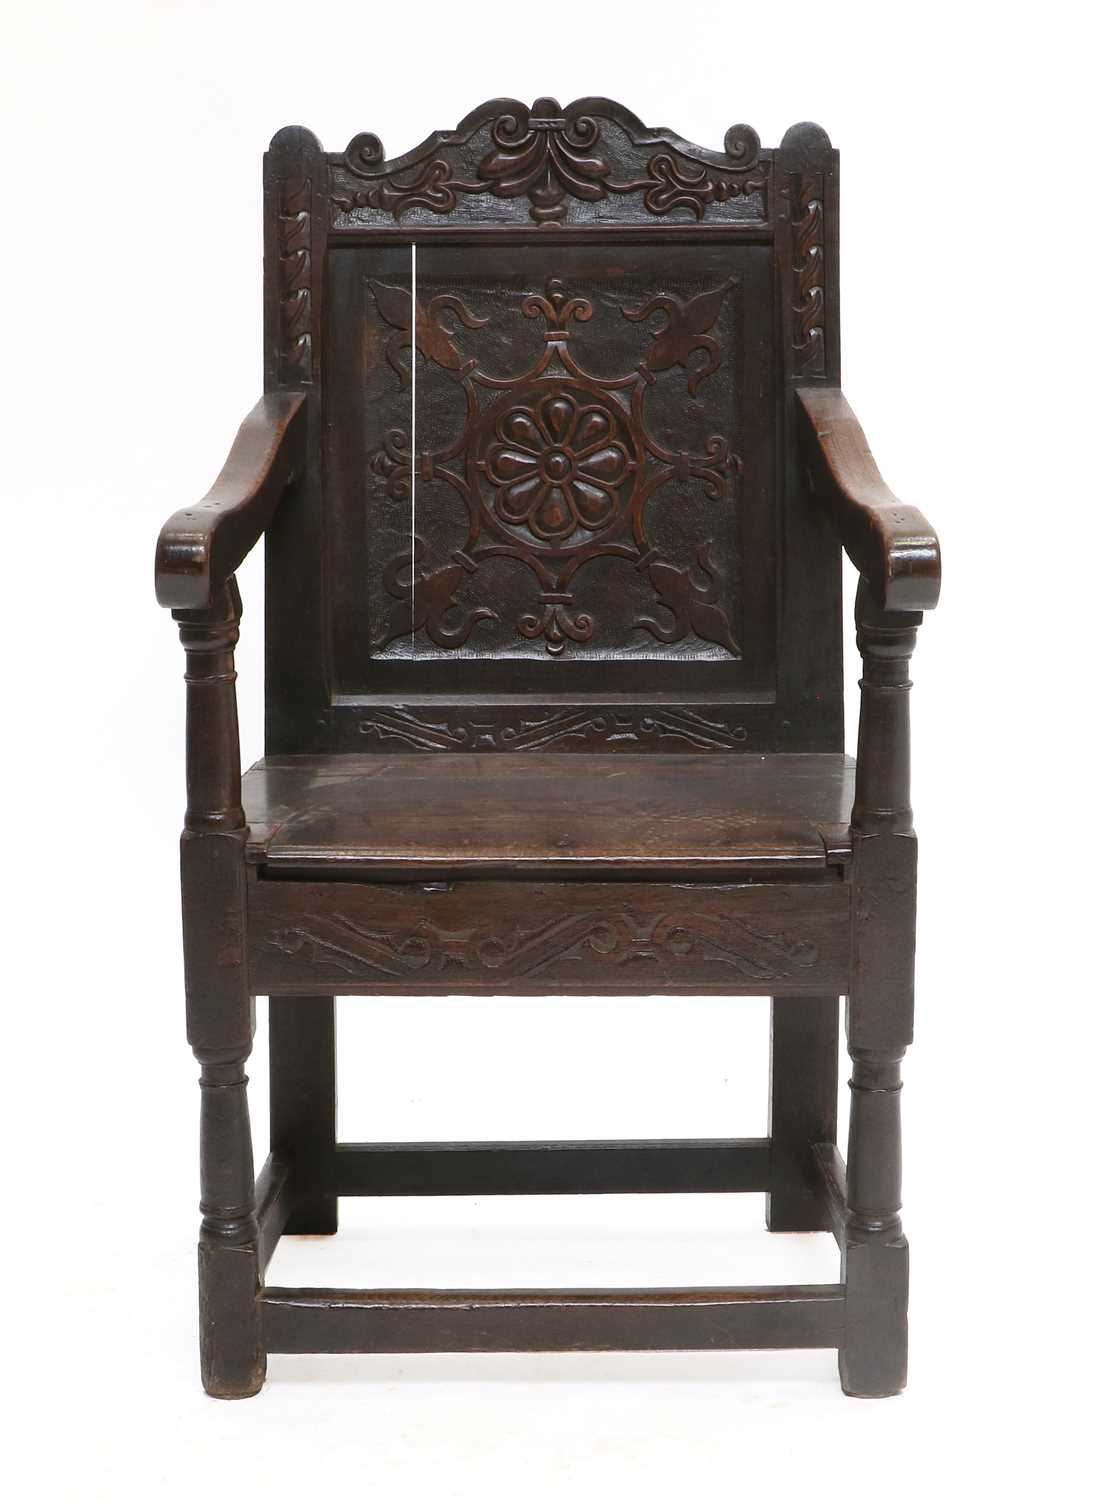 A Late 17th Century Joined Oak and Carved Wainscot Armchair, probably Scottish, the top rail